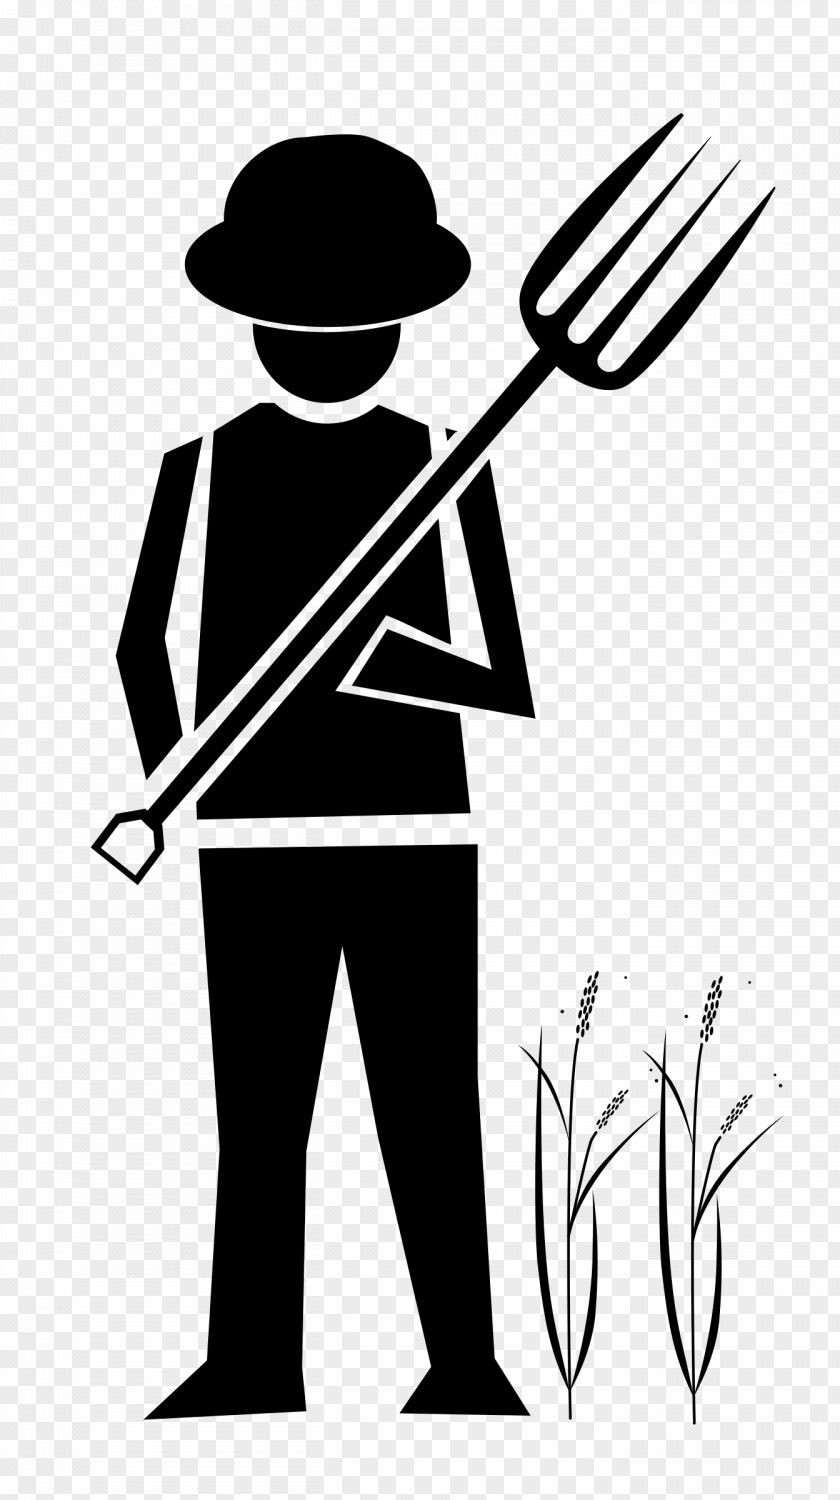 Farmer Soldier Army Clip Art PNG